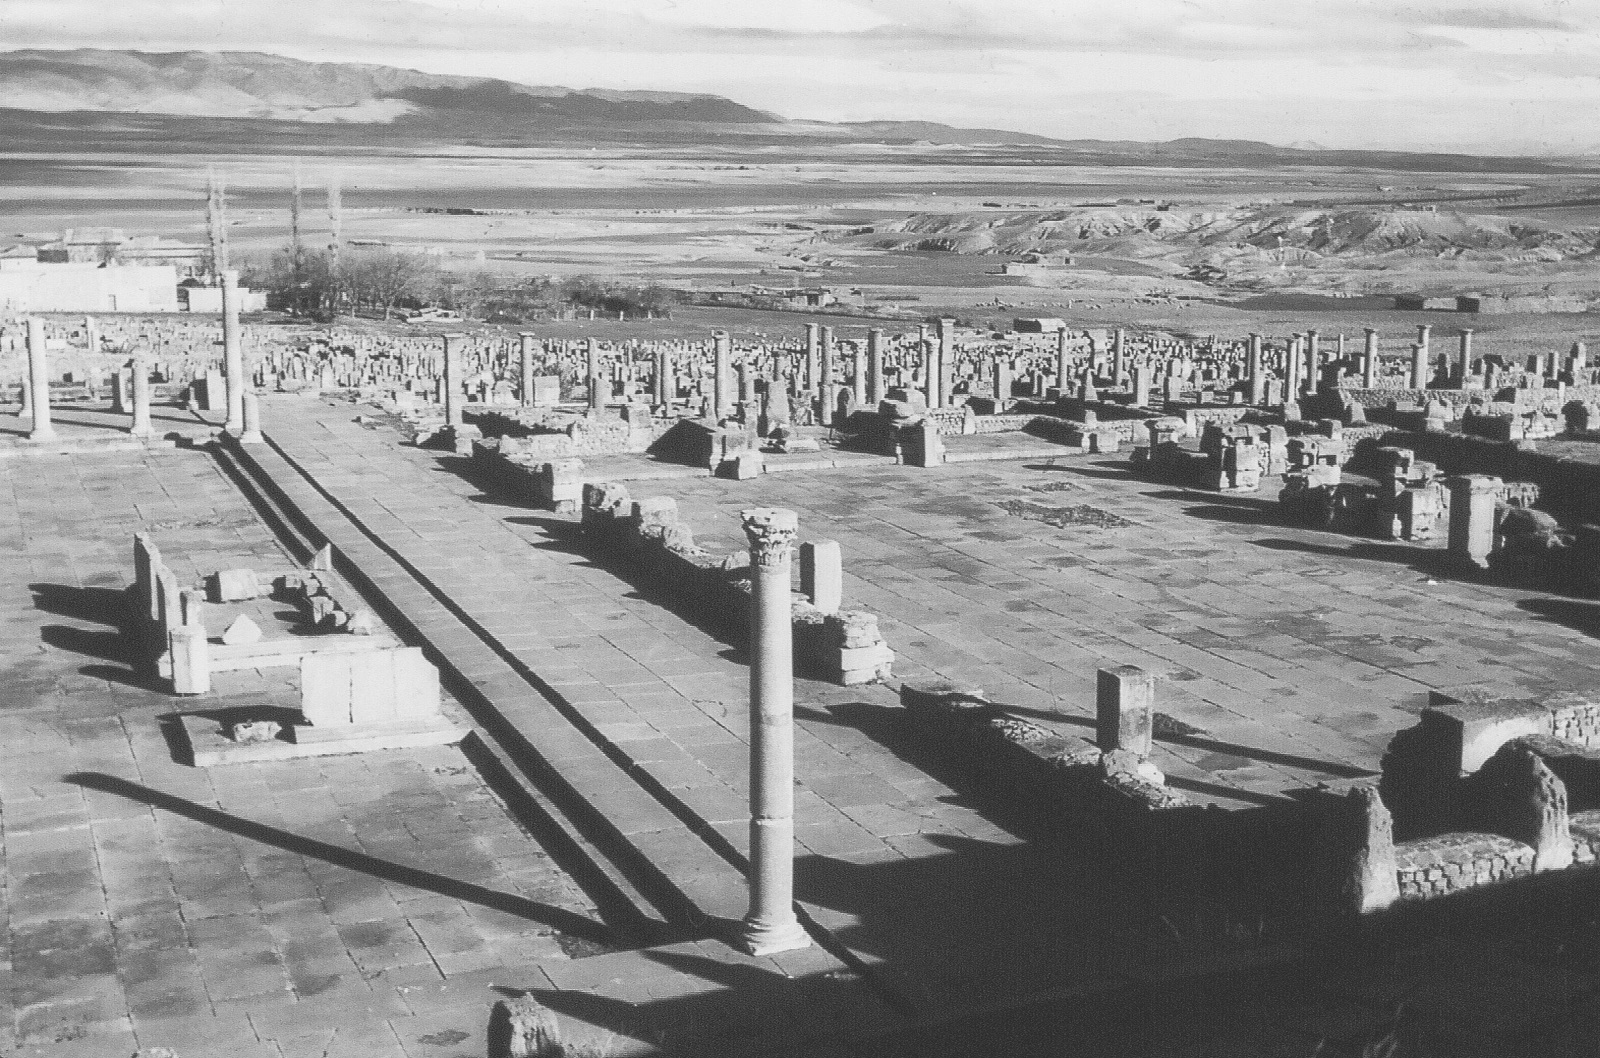 A landscape image depicting the ruins of Timgad, an ancient Roman city. The ruins are surrounded by severly eroded lands, which according to Lowdermilk are now only able to support a few hundred inhabitants living in the huts shown in the background.